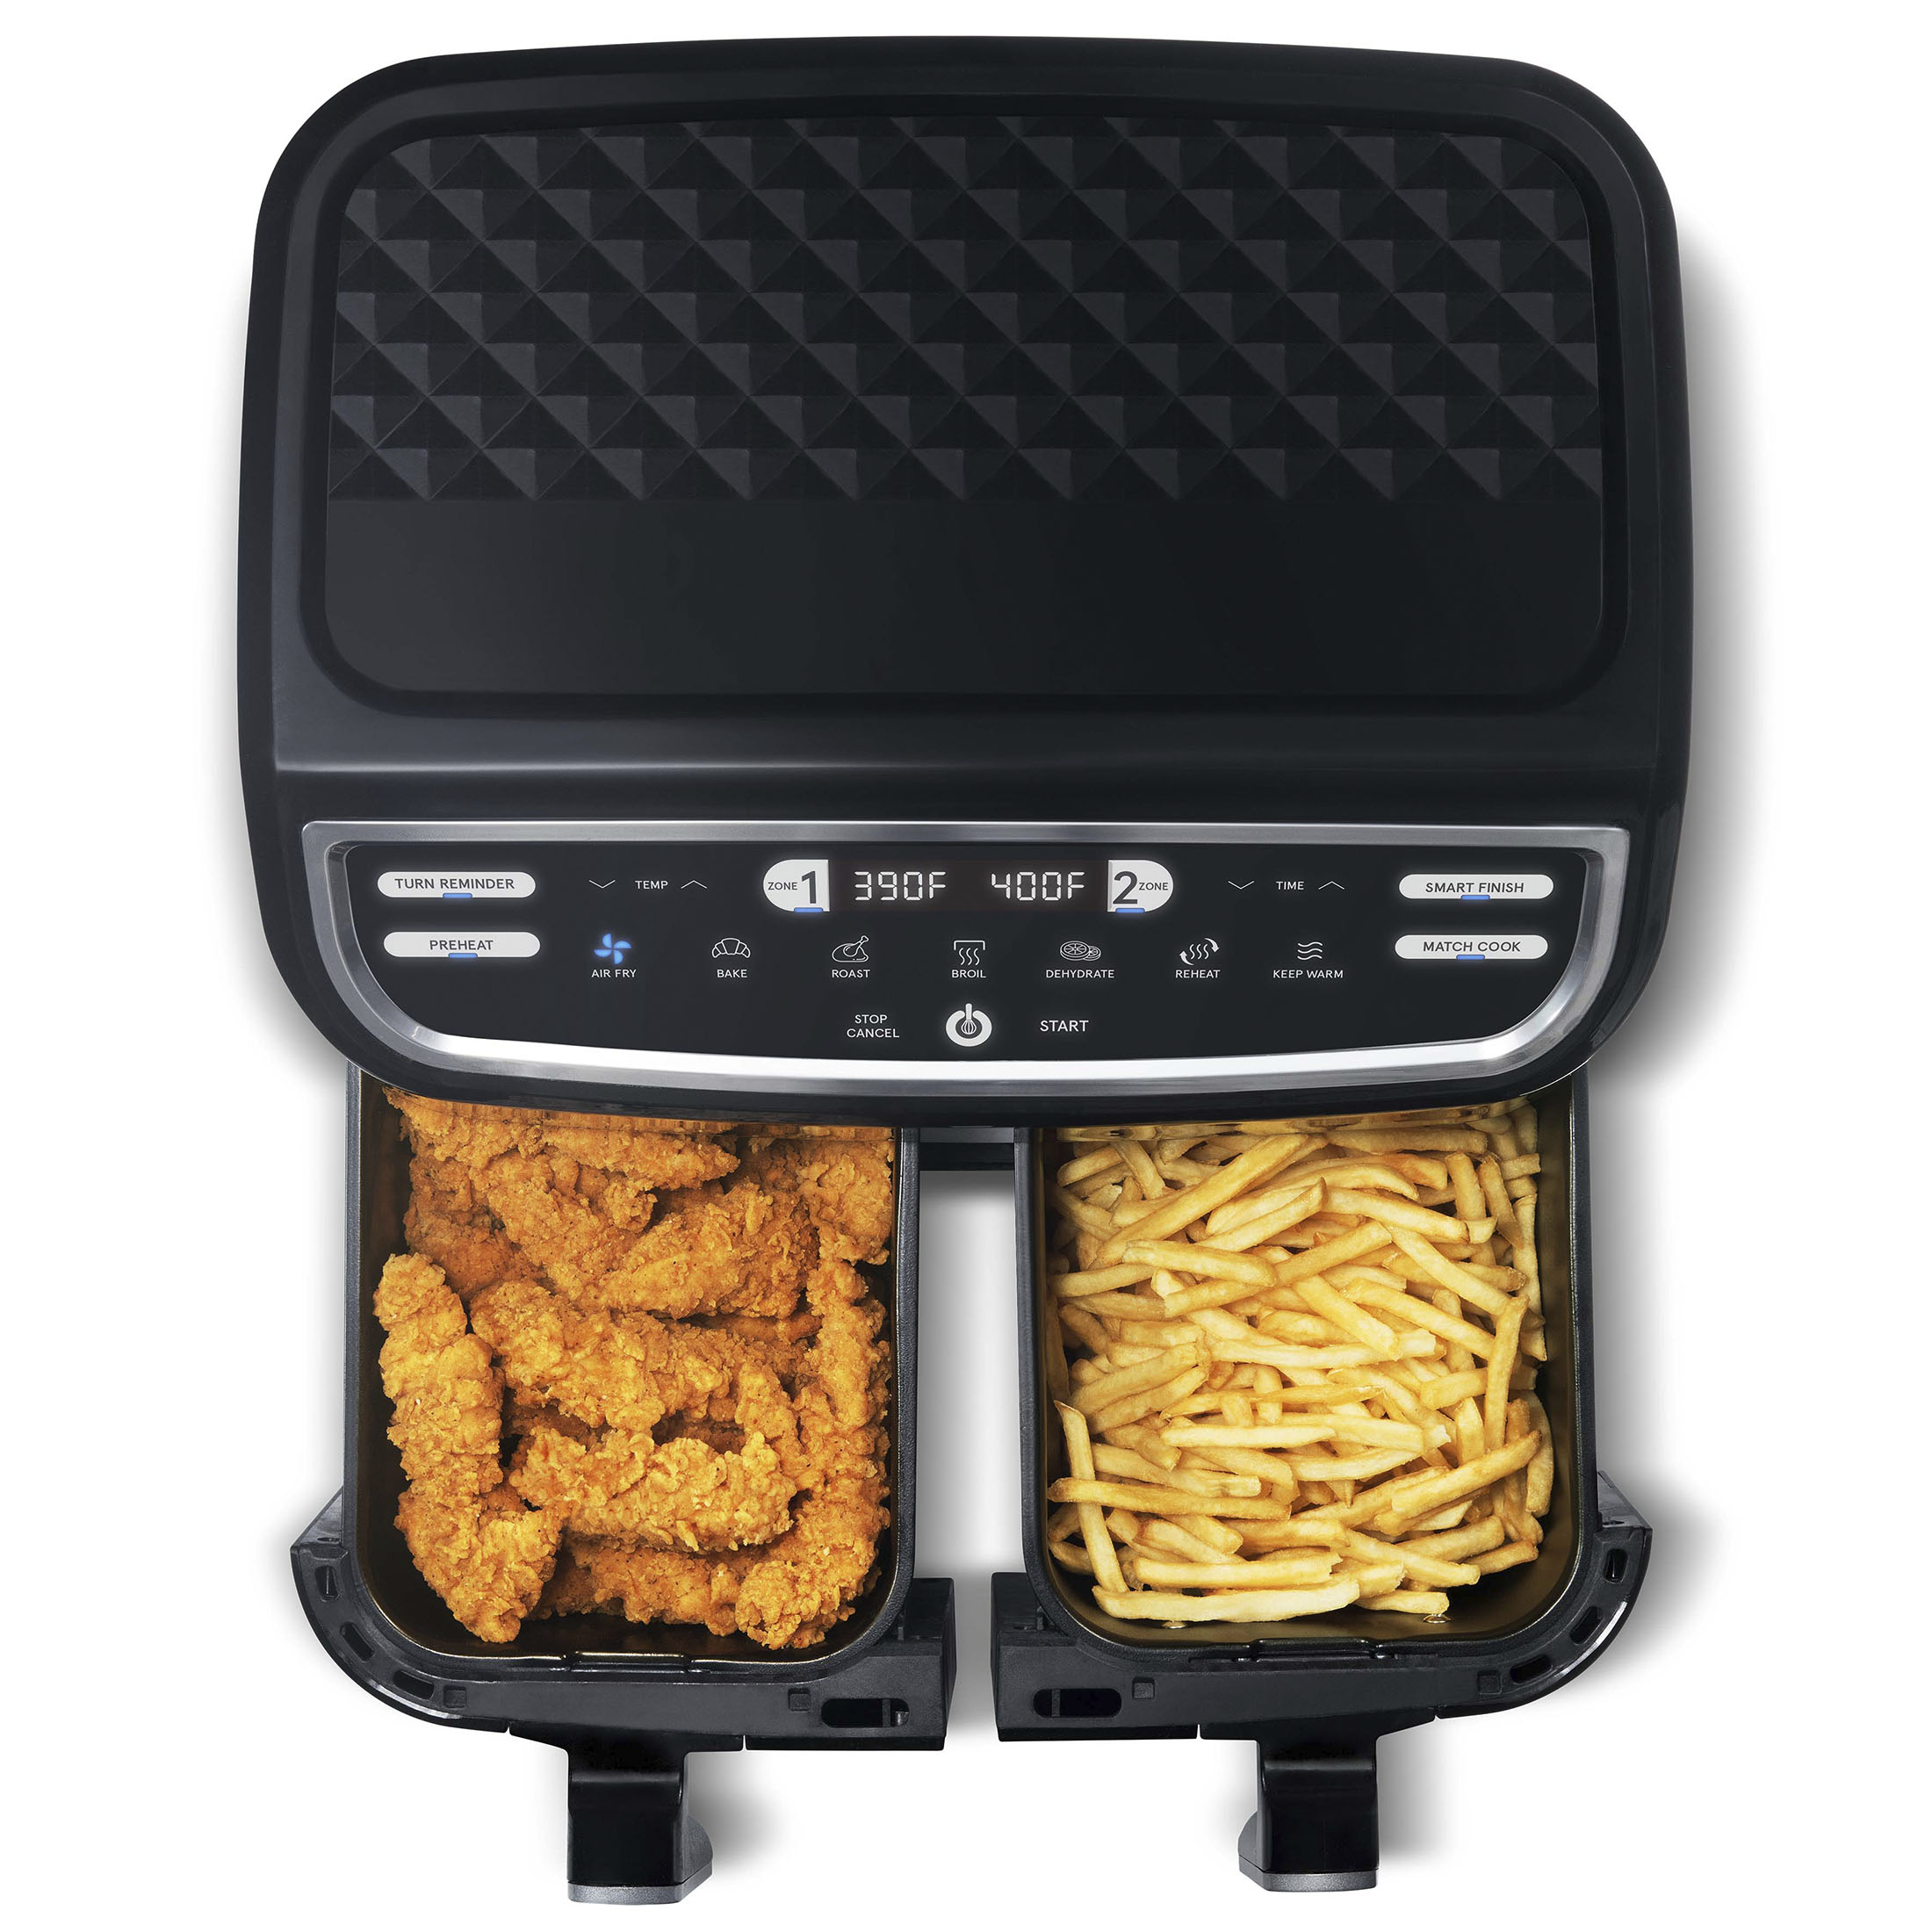 Gourmia 9 Qt 7-in-1 Dual Basket Digital Air Fryer with Smart Finish, BLK, 12.598 H, New - image 12 of 14